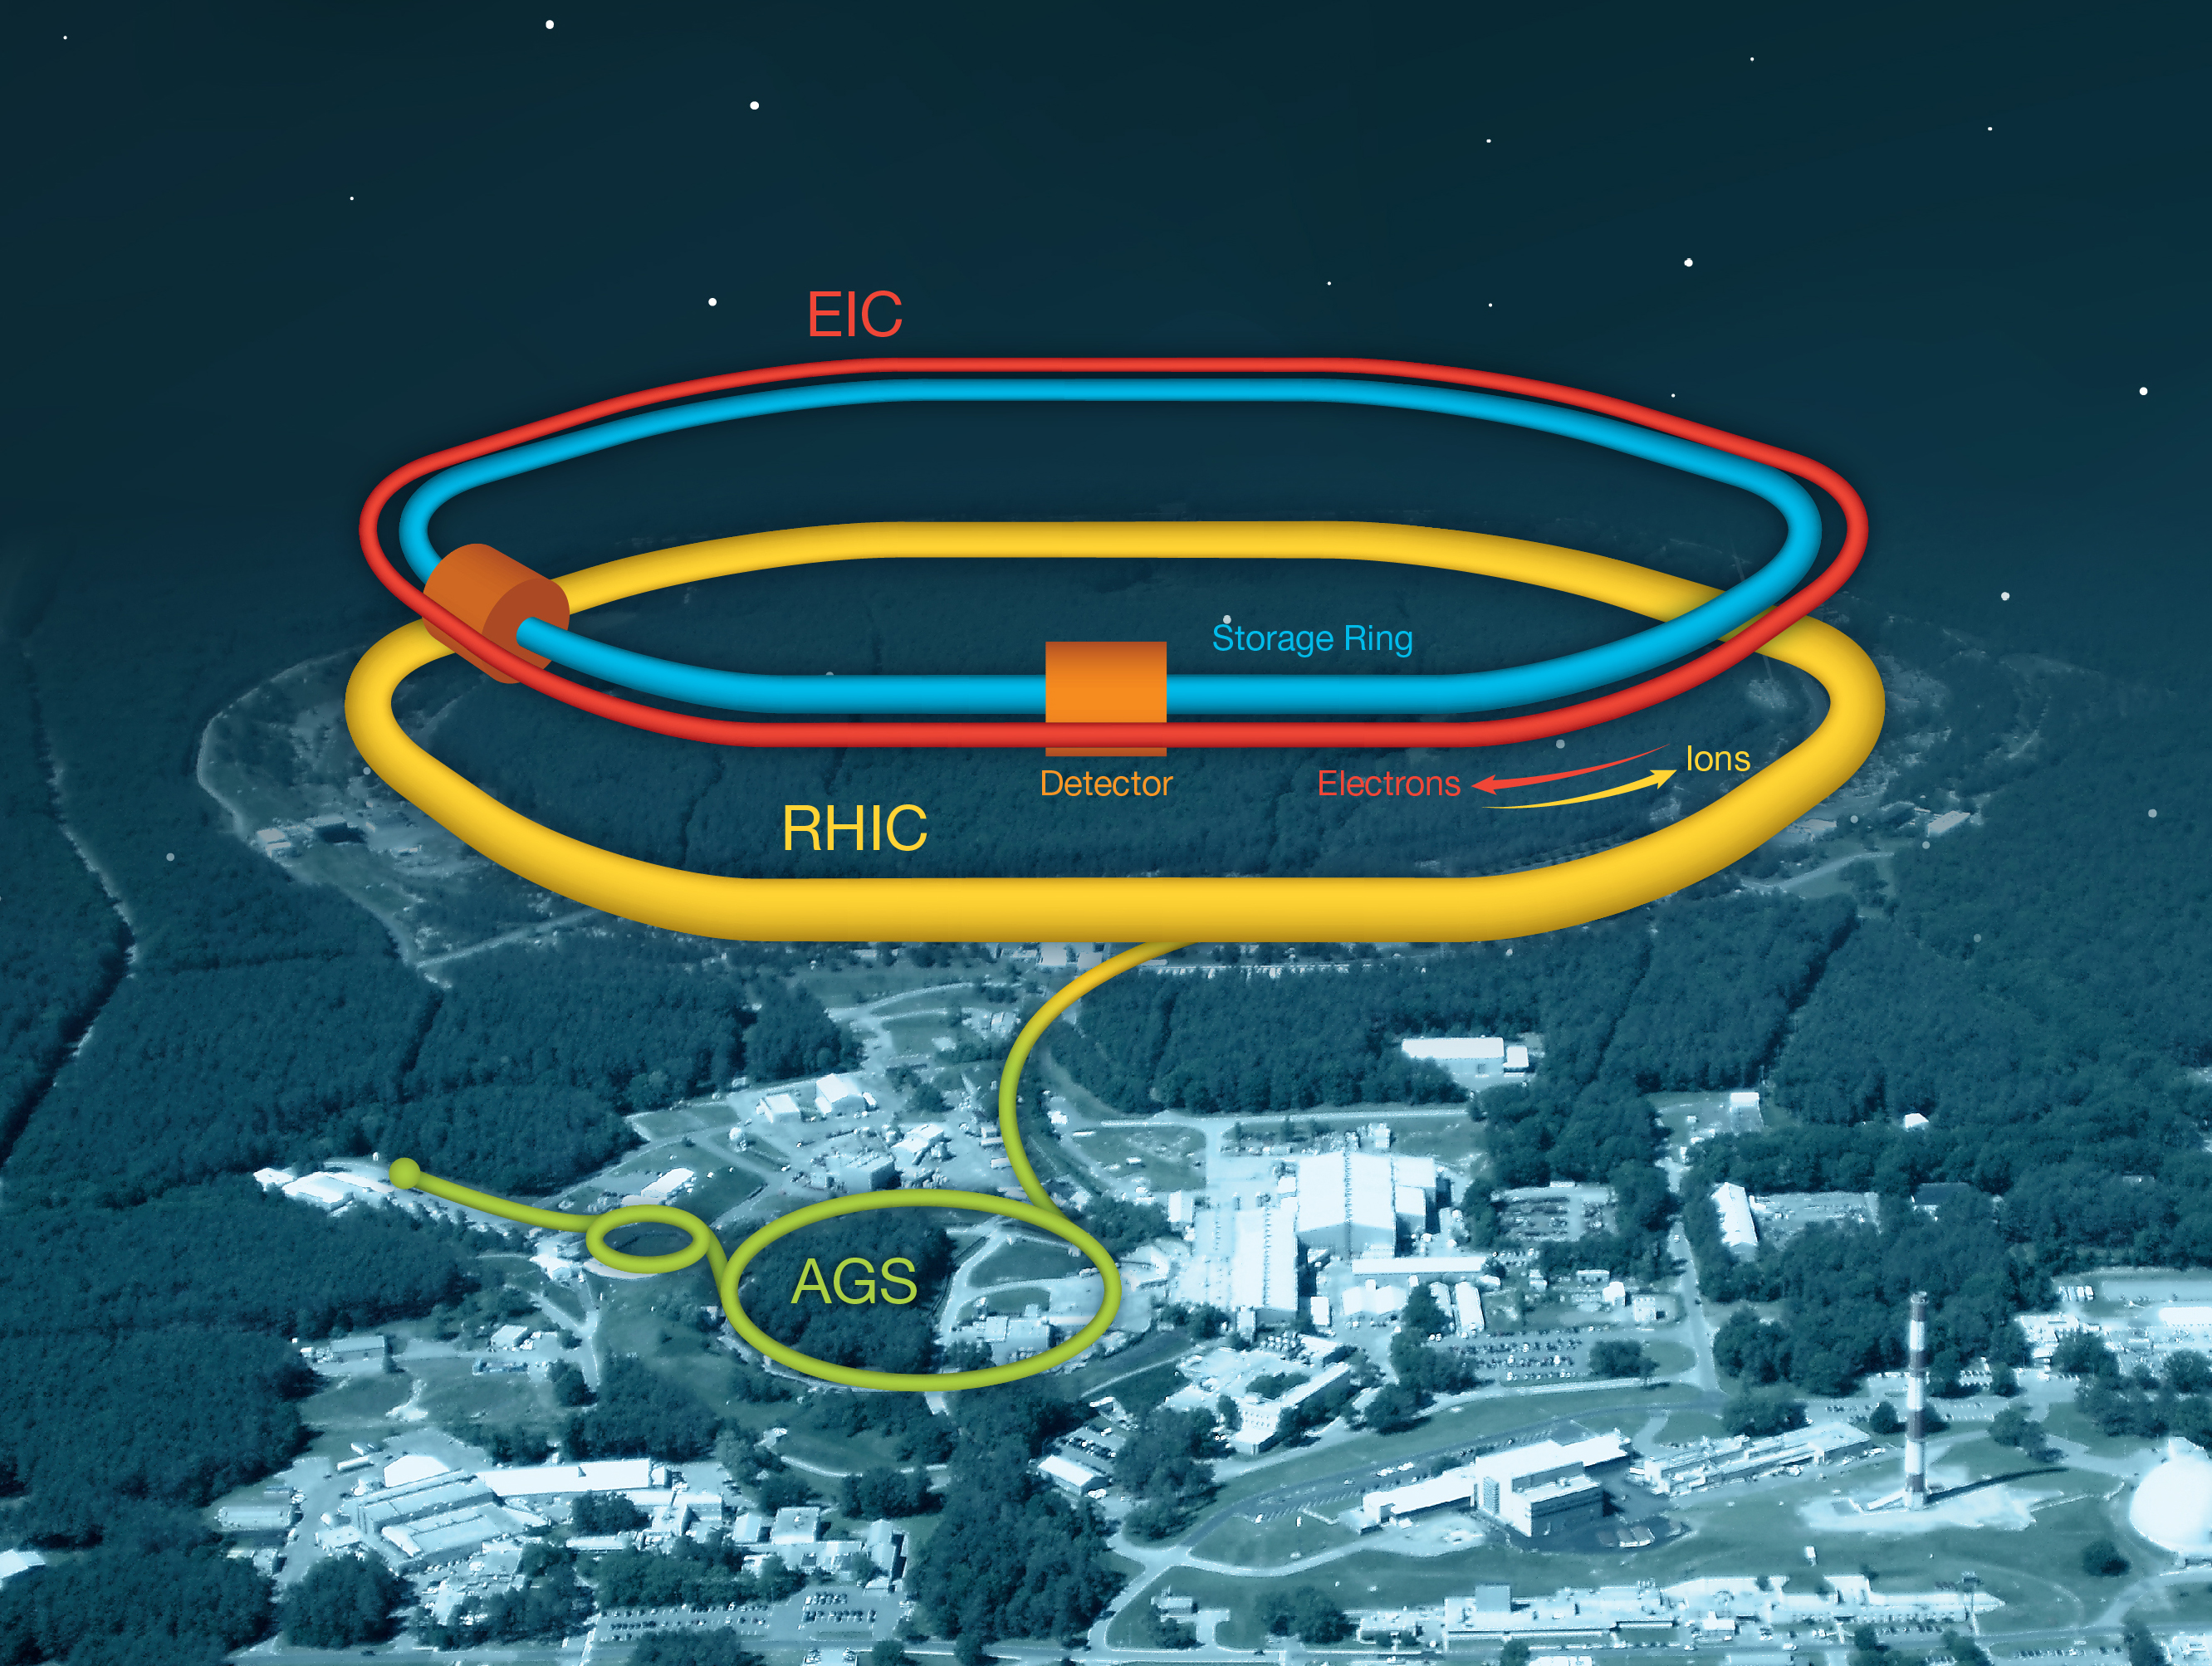 Newswise: MEDIA ADVISORY: Updates on the Electron-Ion Collider (EIC) at the April APS Meeting